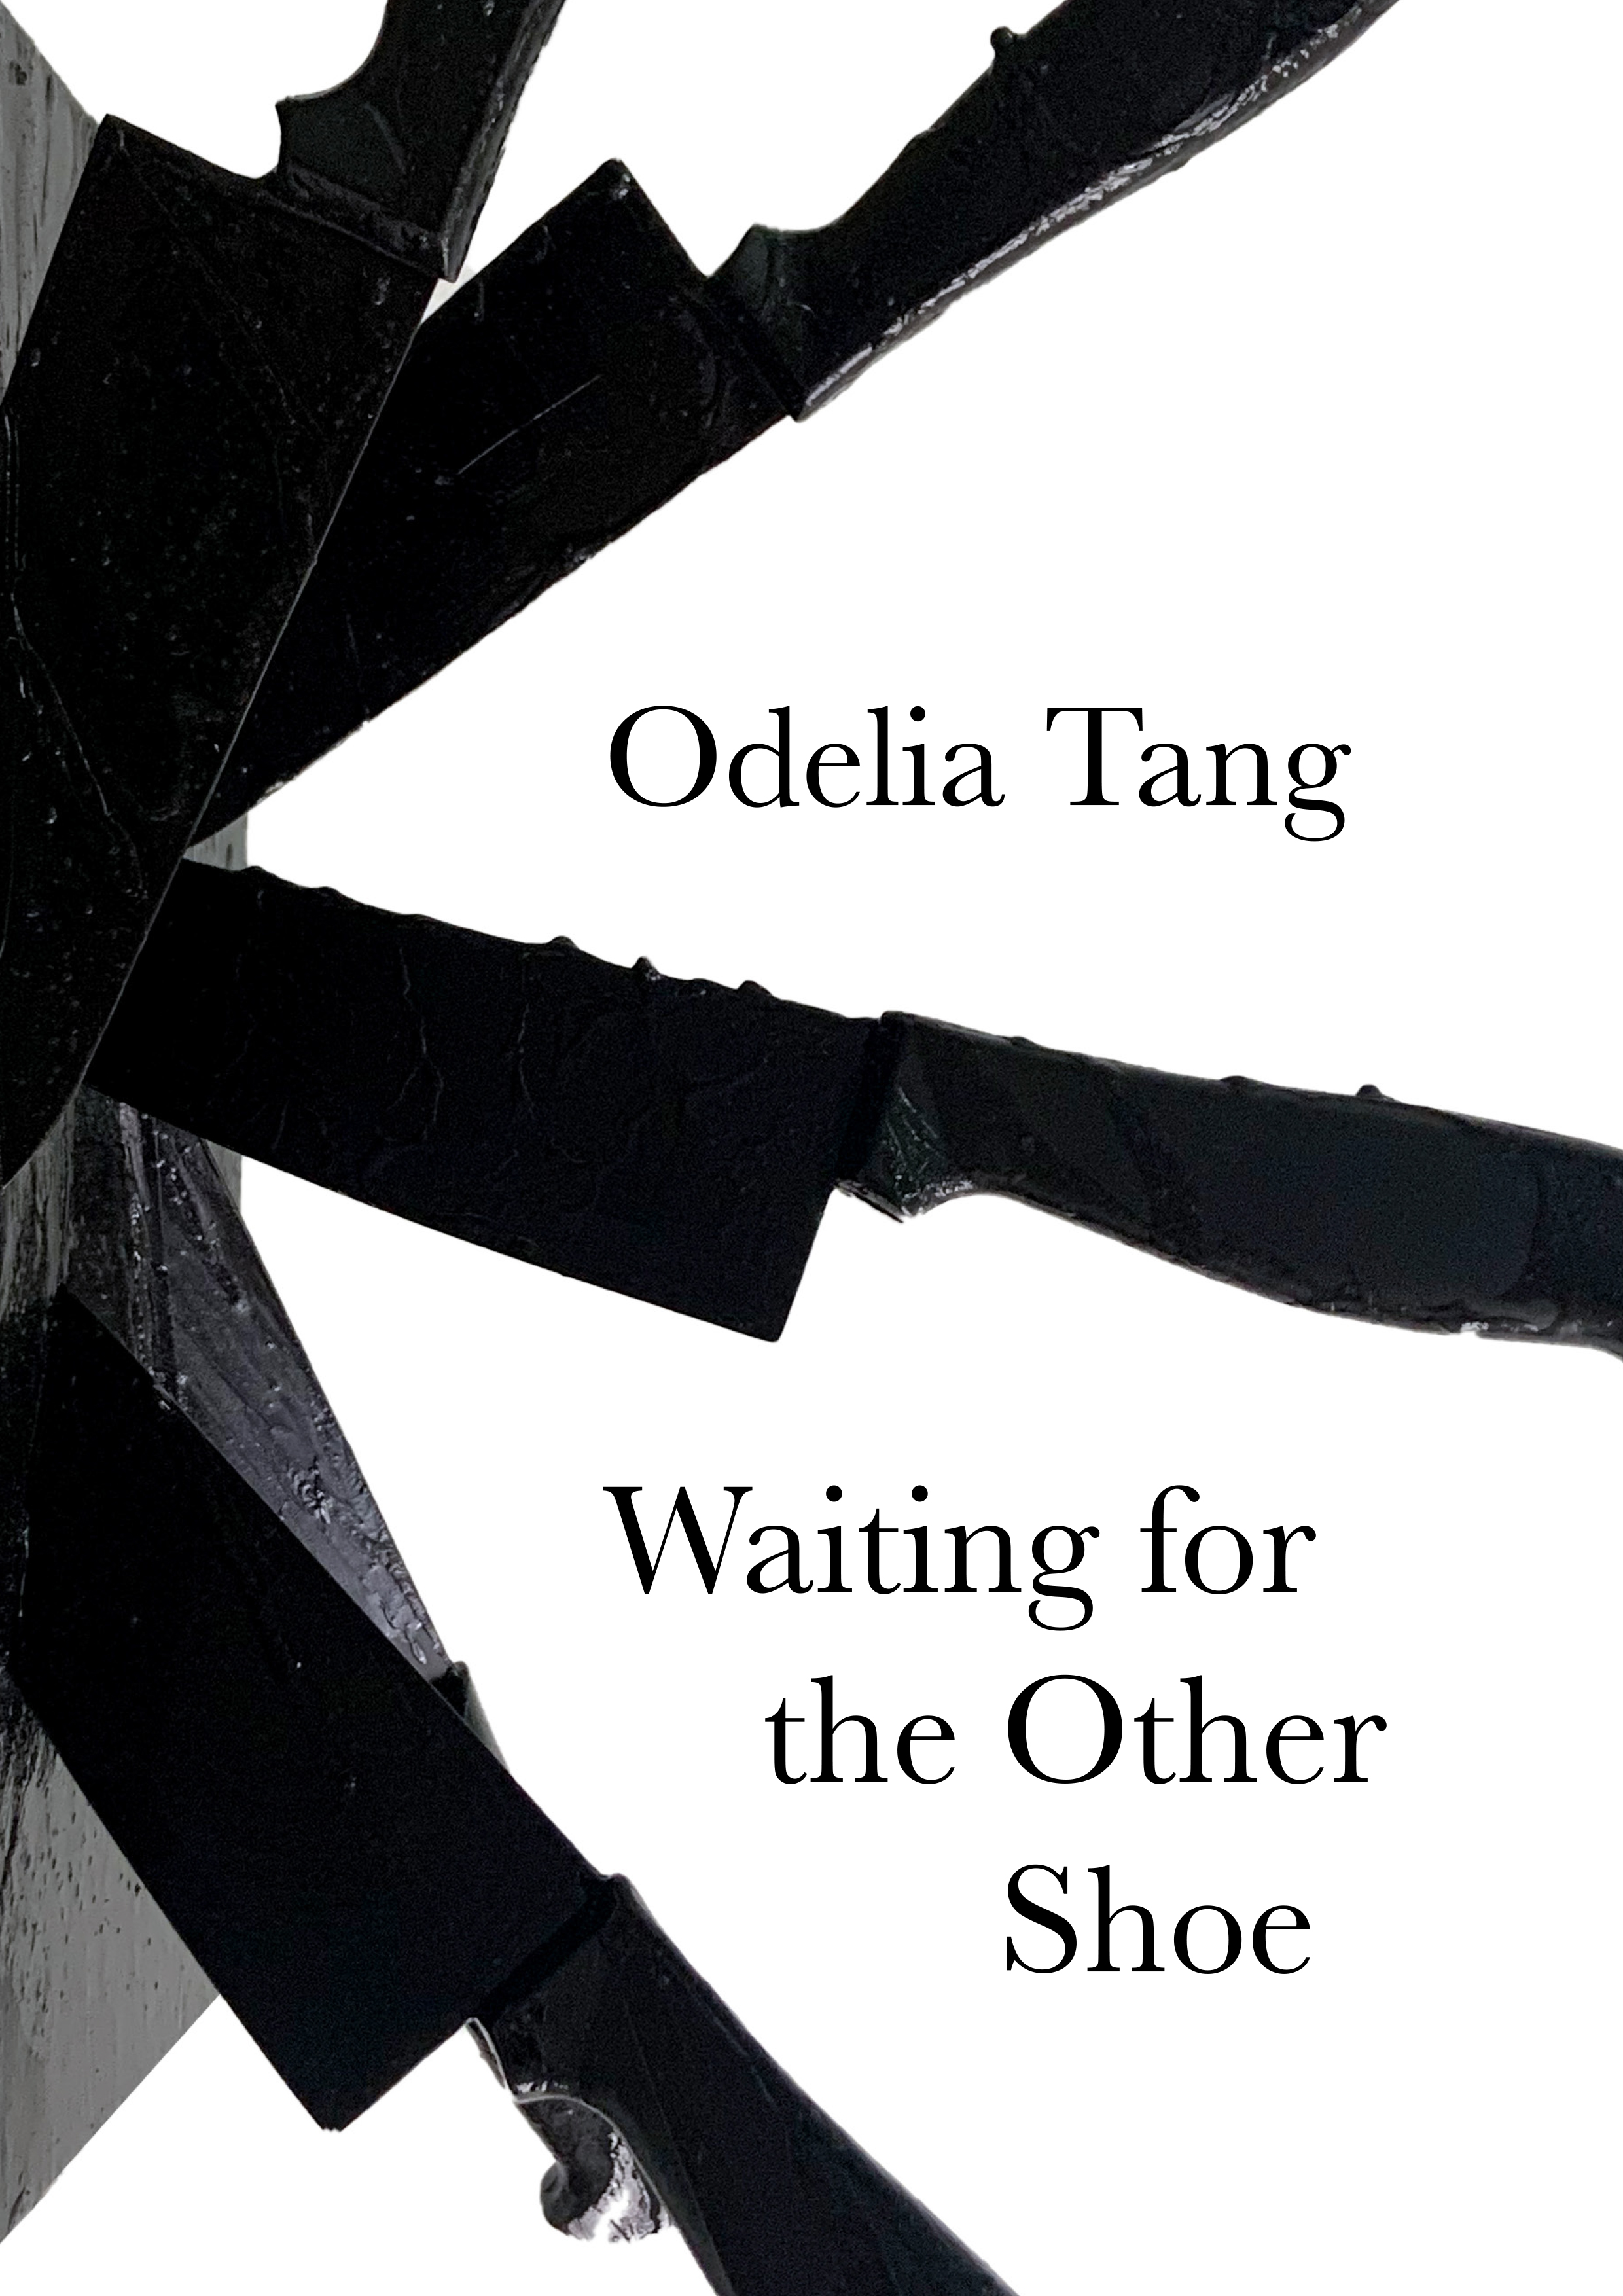 Odelia Tang – Waiting for the Other Shoe